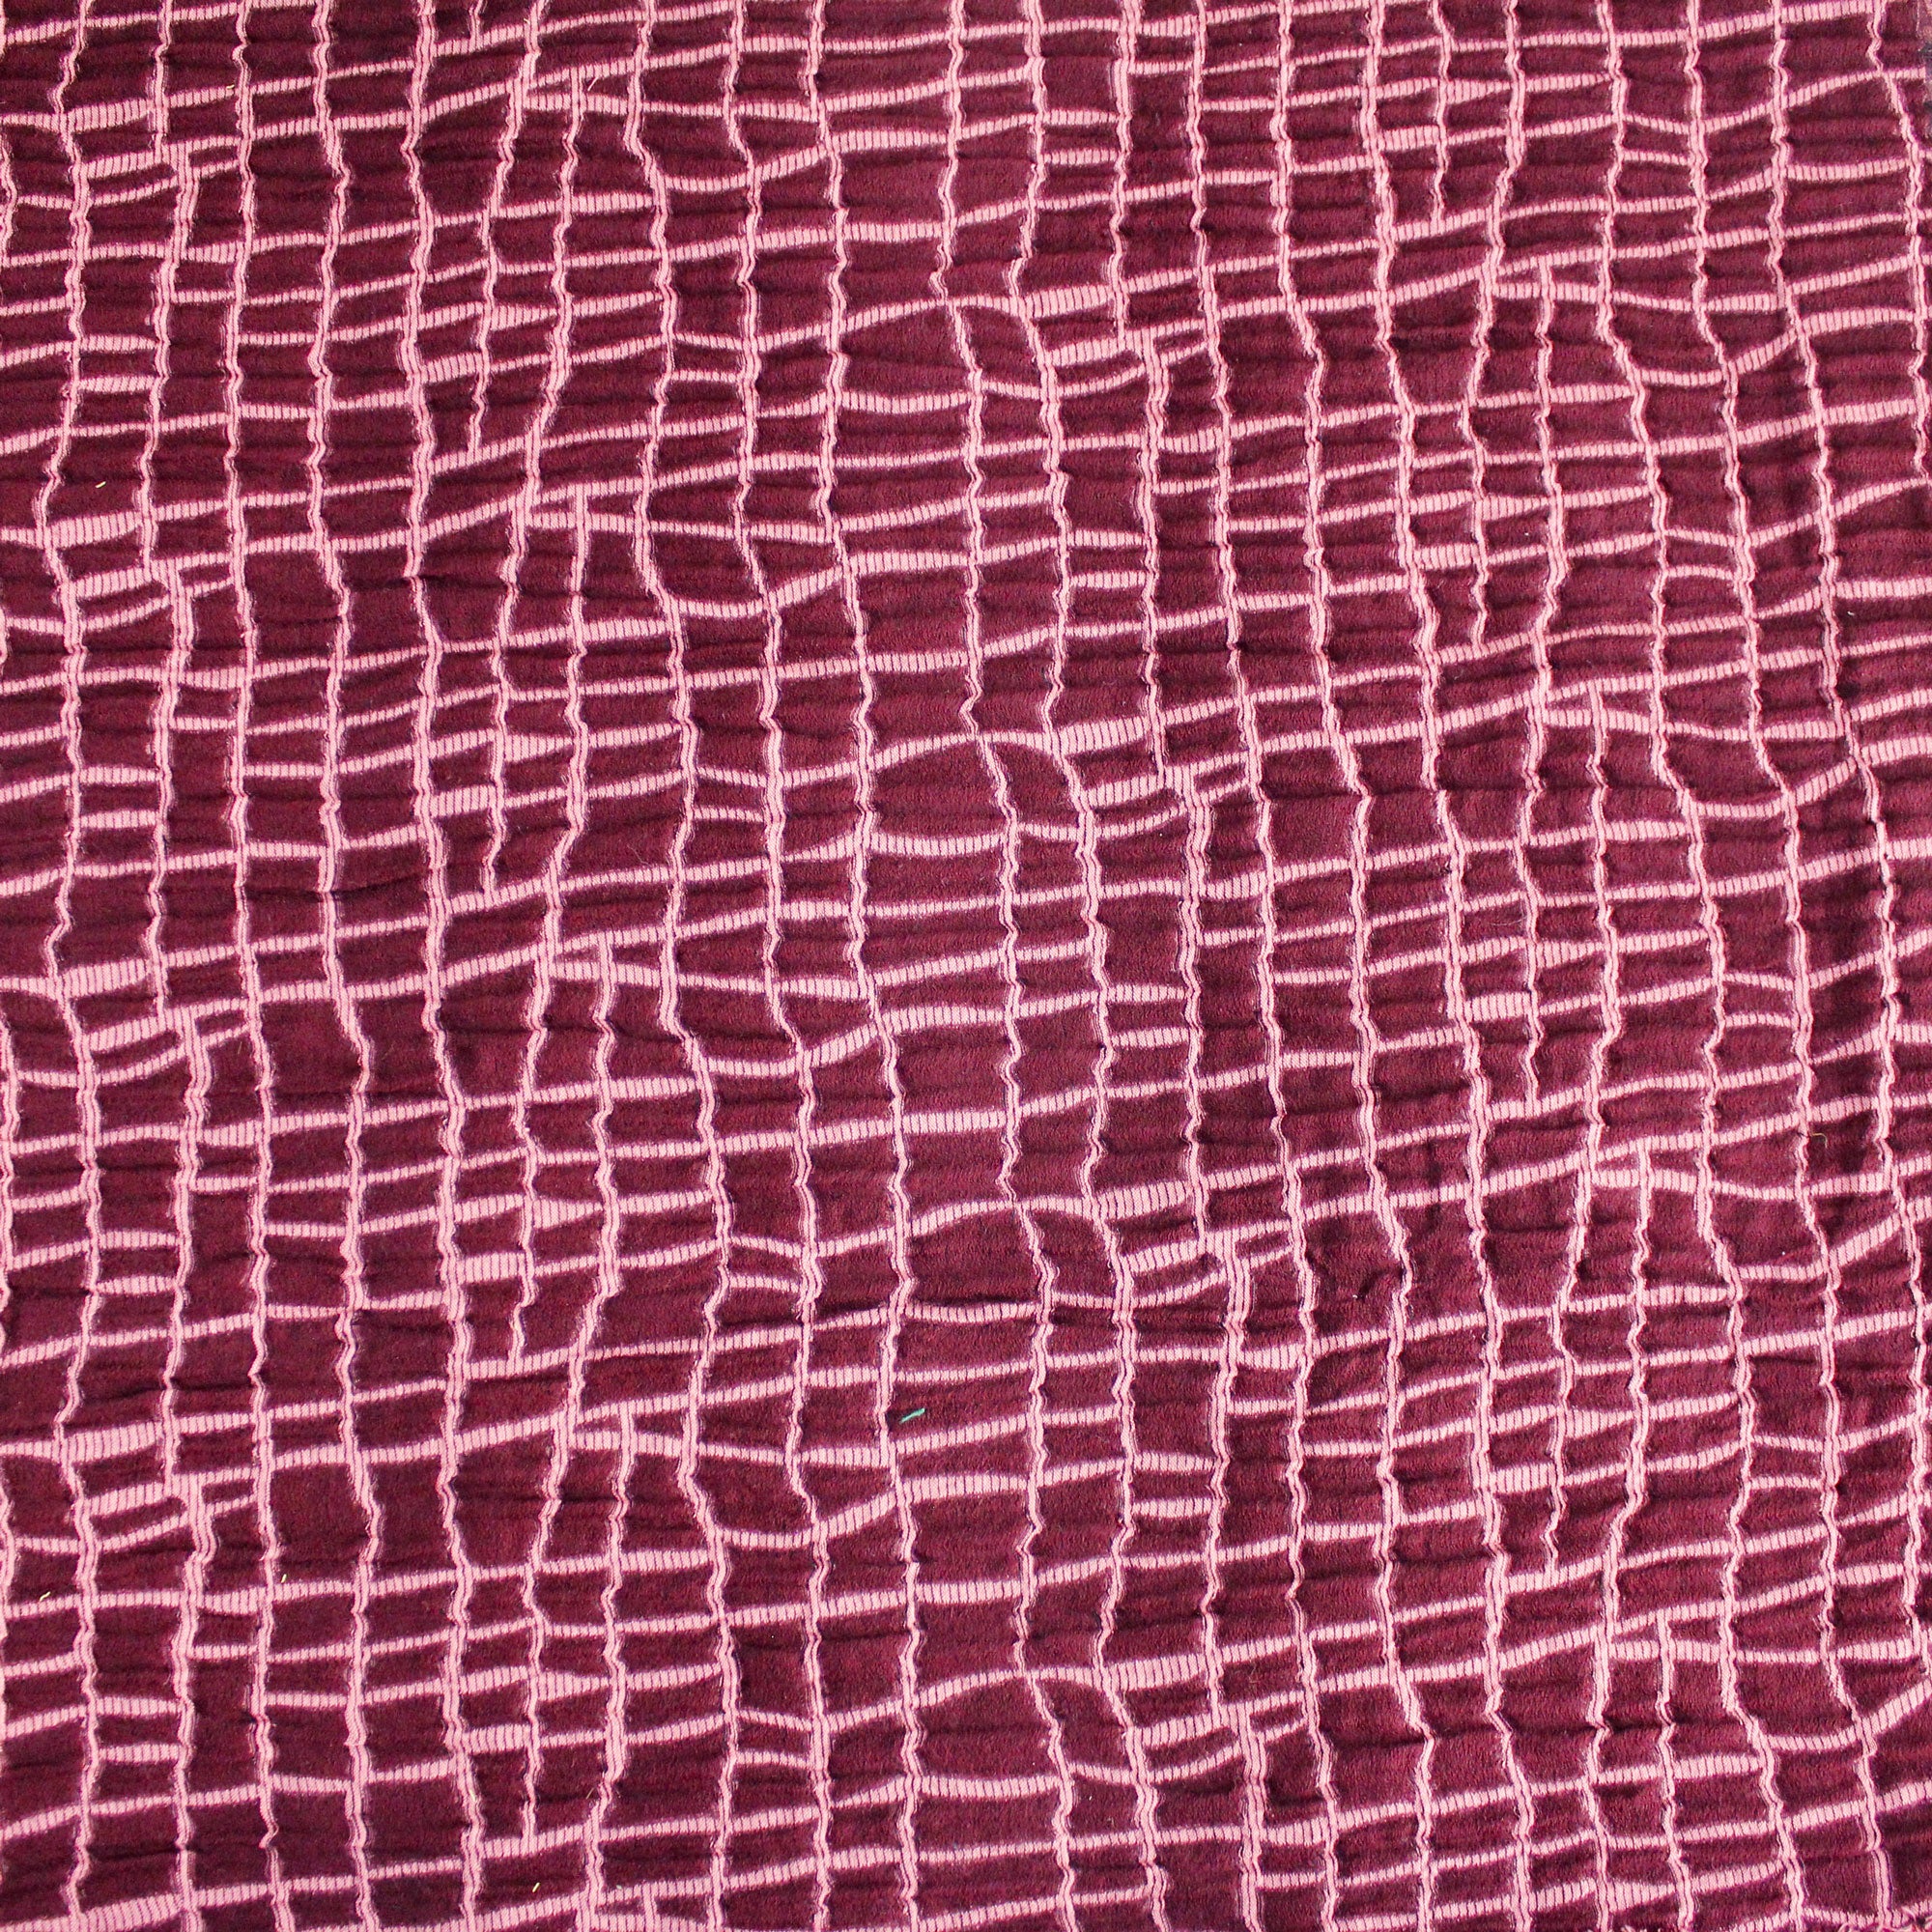 Reversible cotton jacquard fabric with burgundy and pink checks